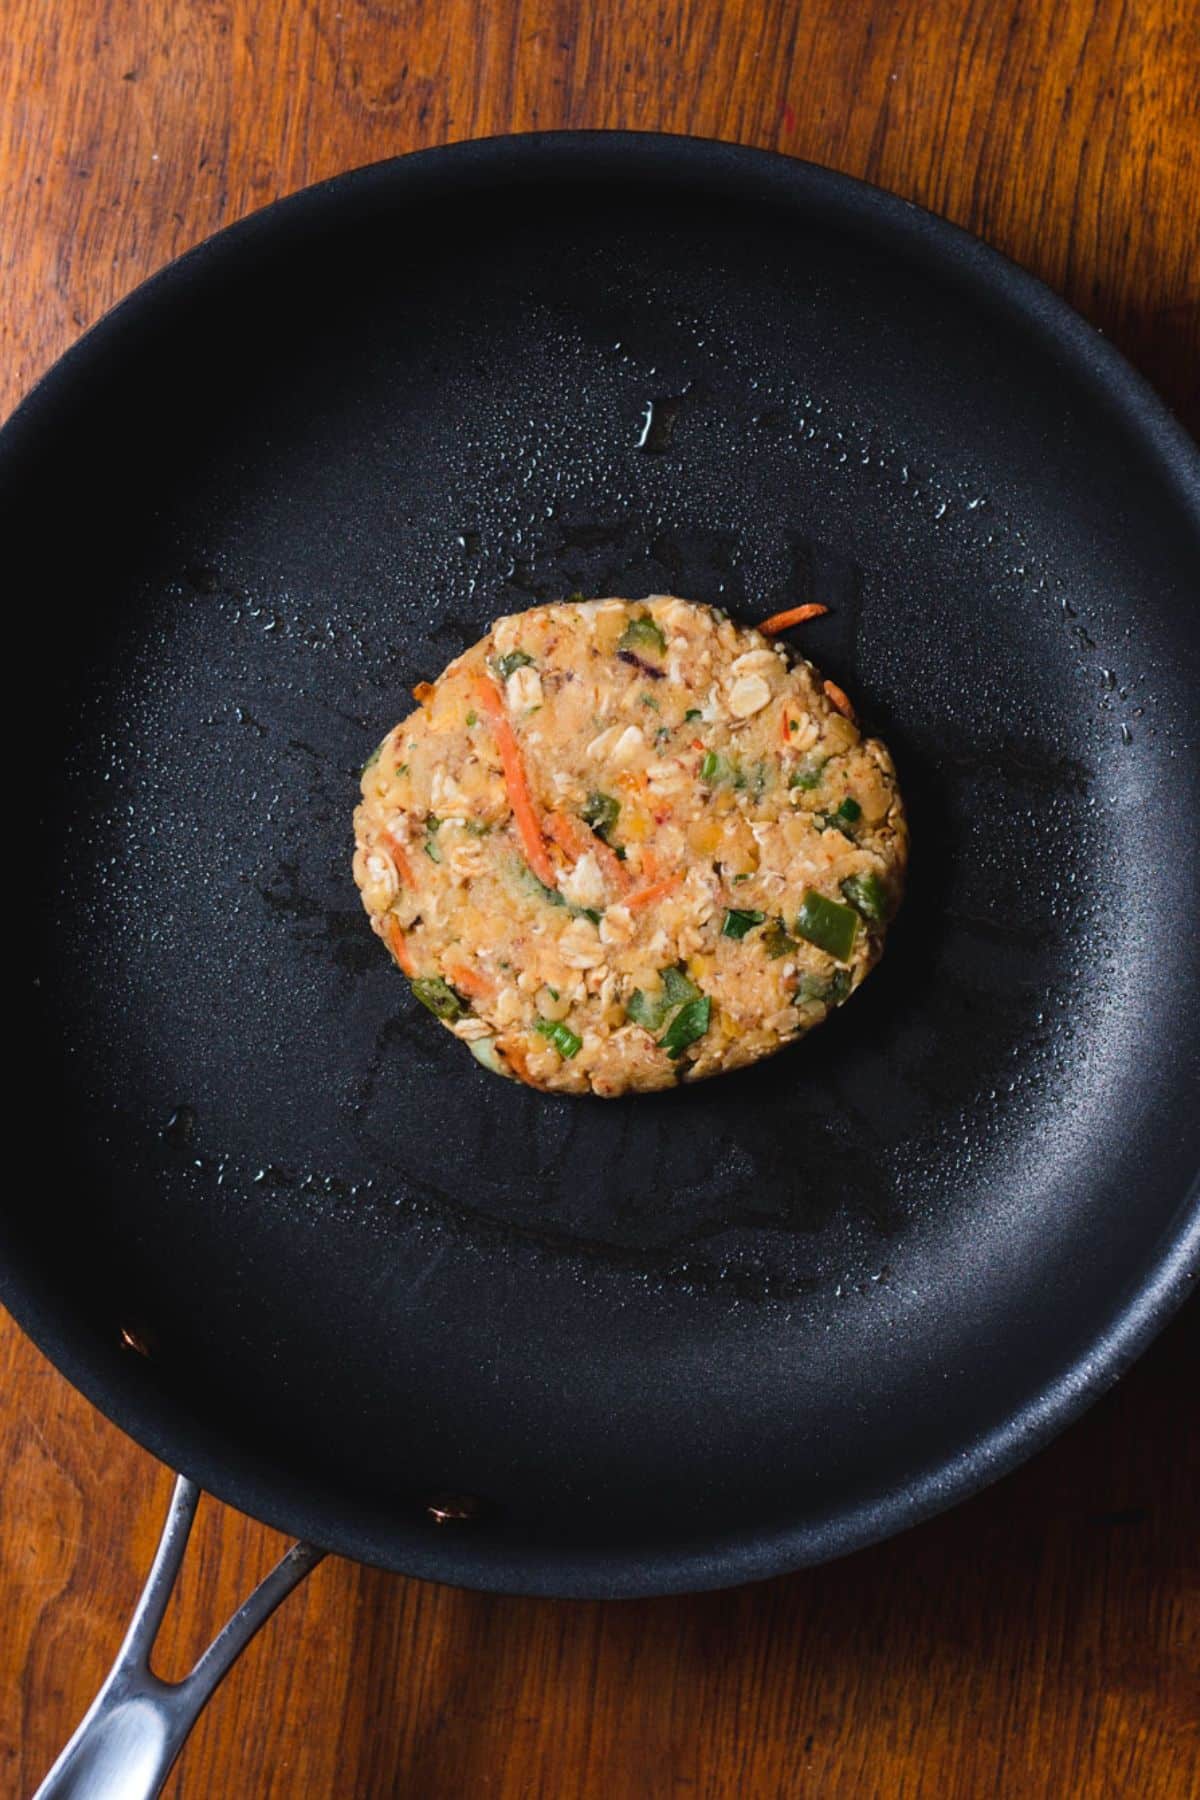 One red lentil patty being cooked in a black skillet.